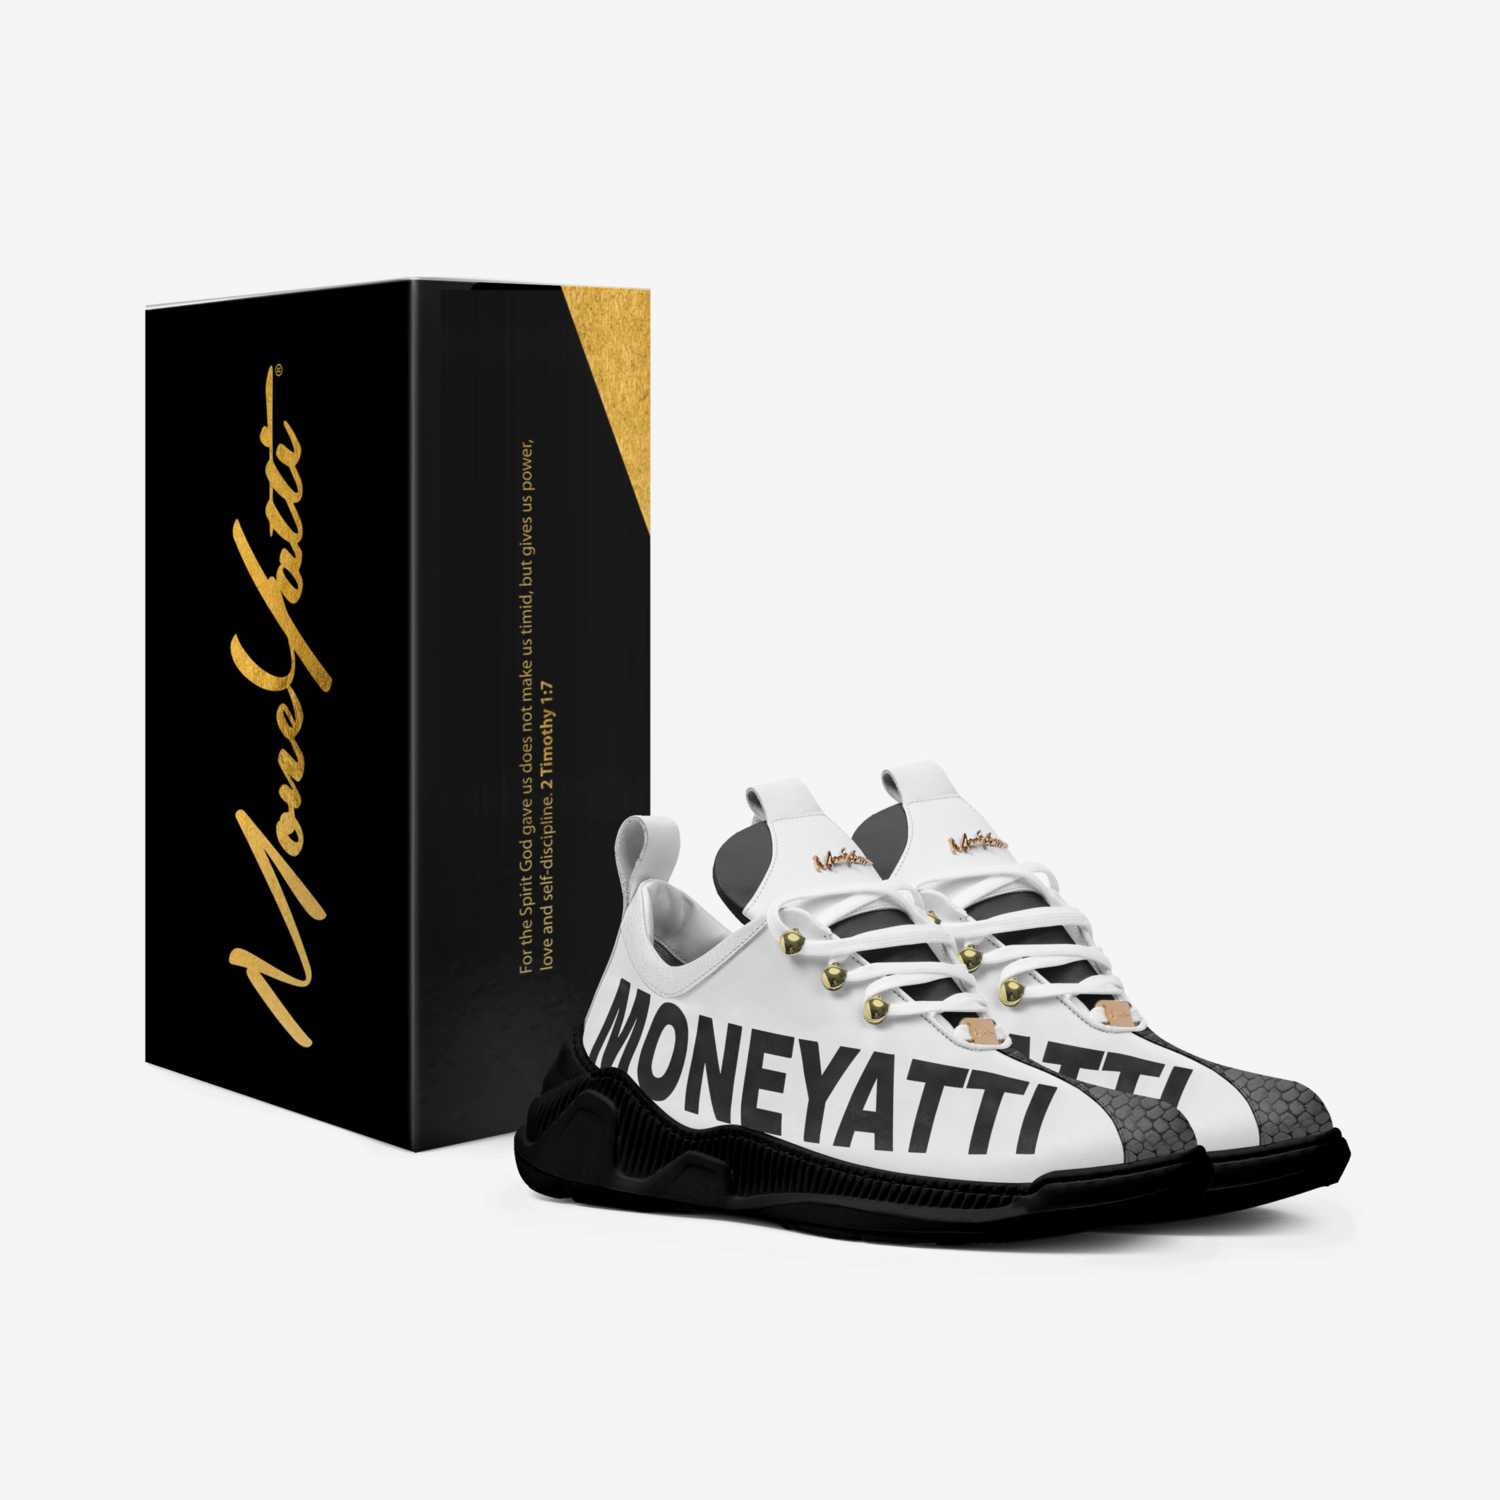 Sig27 custom made in Italy shoes by Moneyatti Brand | Box view